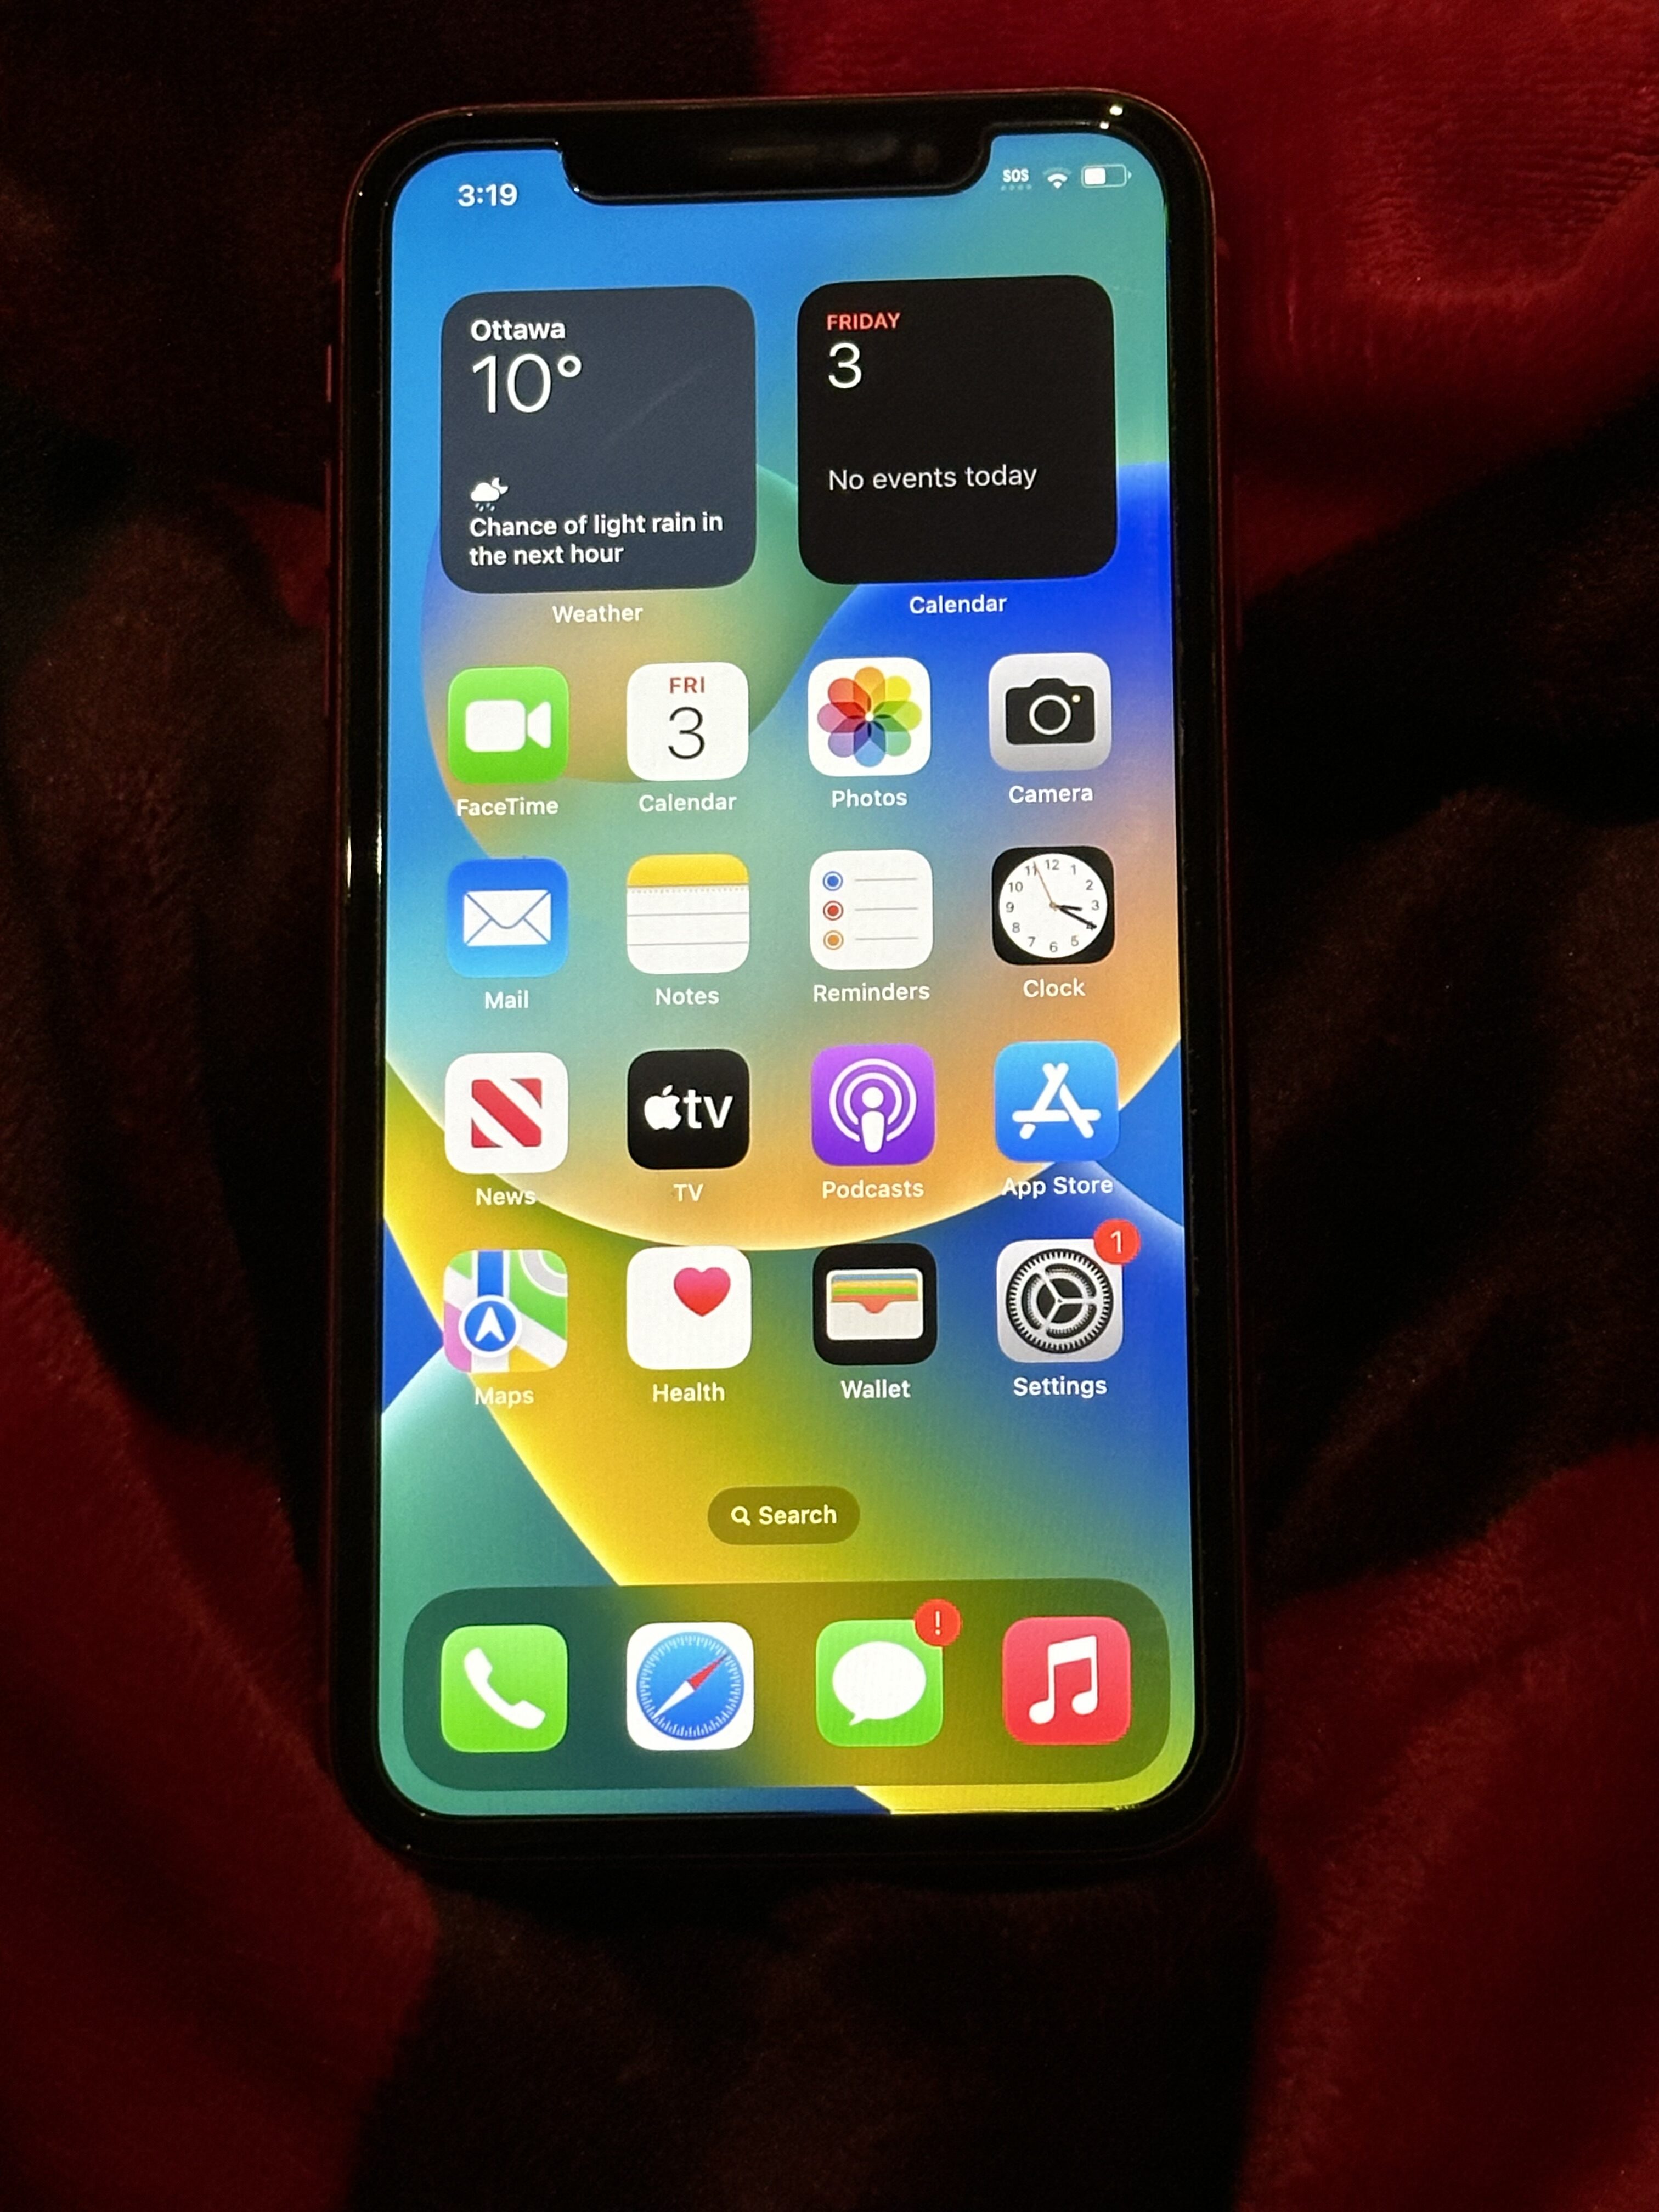 Product Red iPhone 11 (64gb) for sale - RedFlagDeals.com Forums